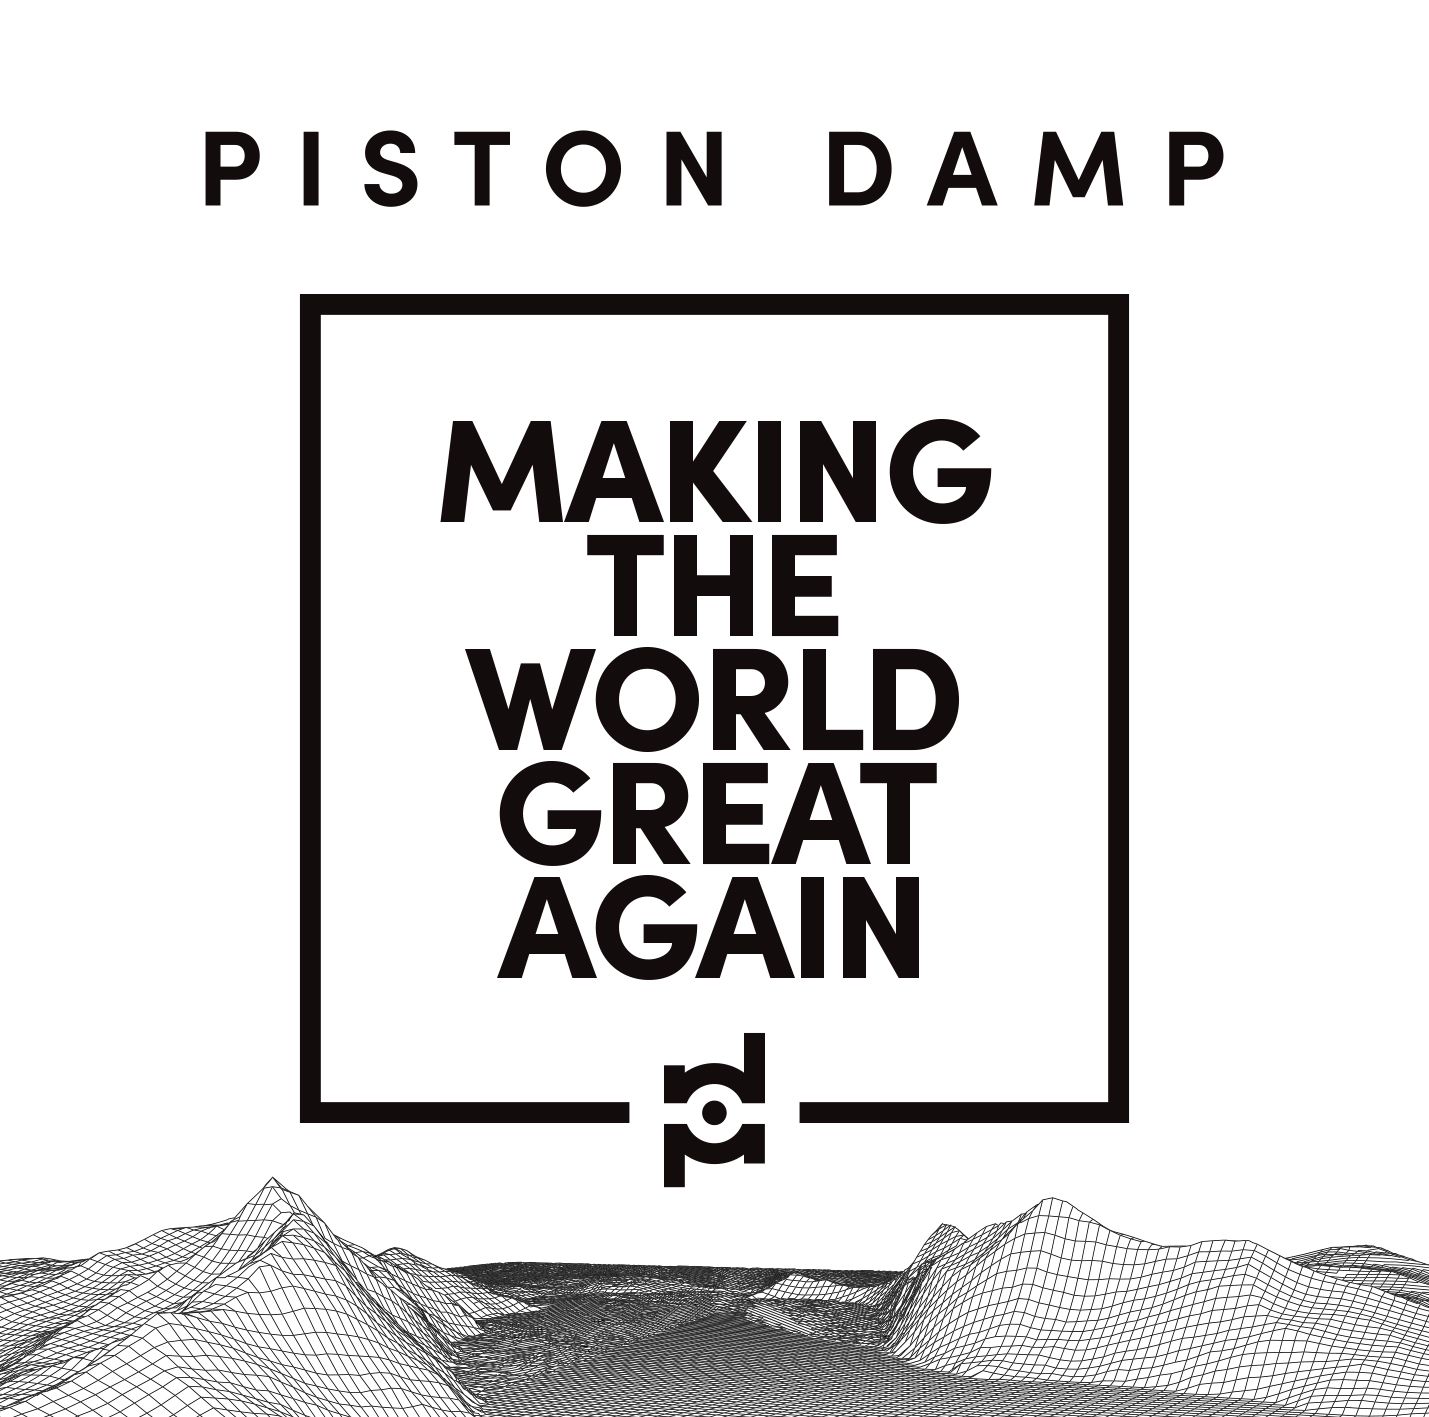 Pinston Damp  – “Making The World Great Again”, is ready for release on June 10th!